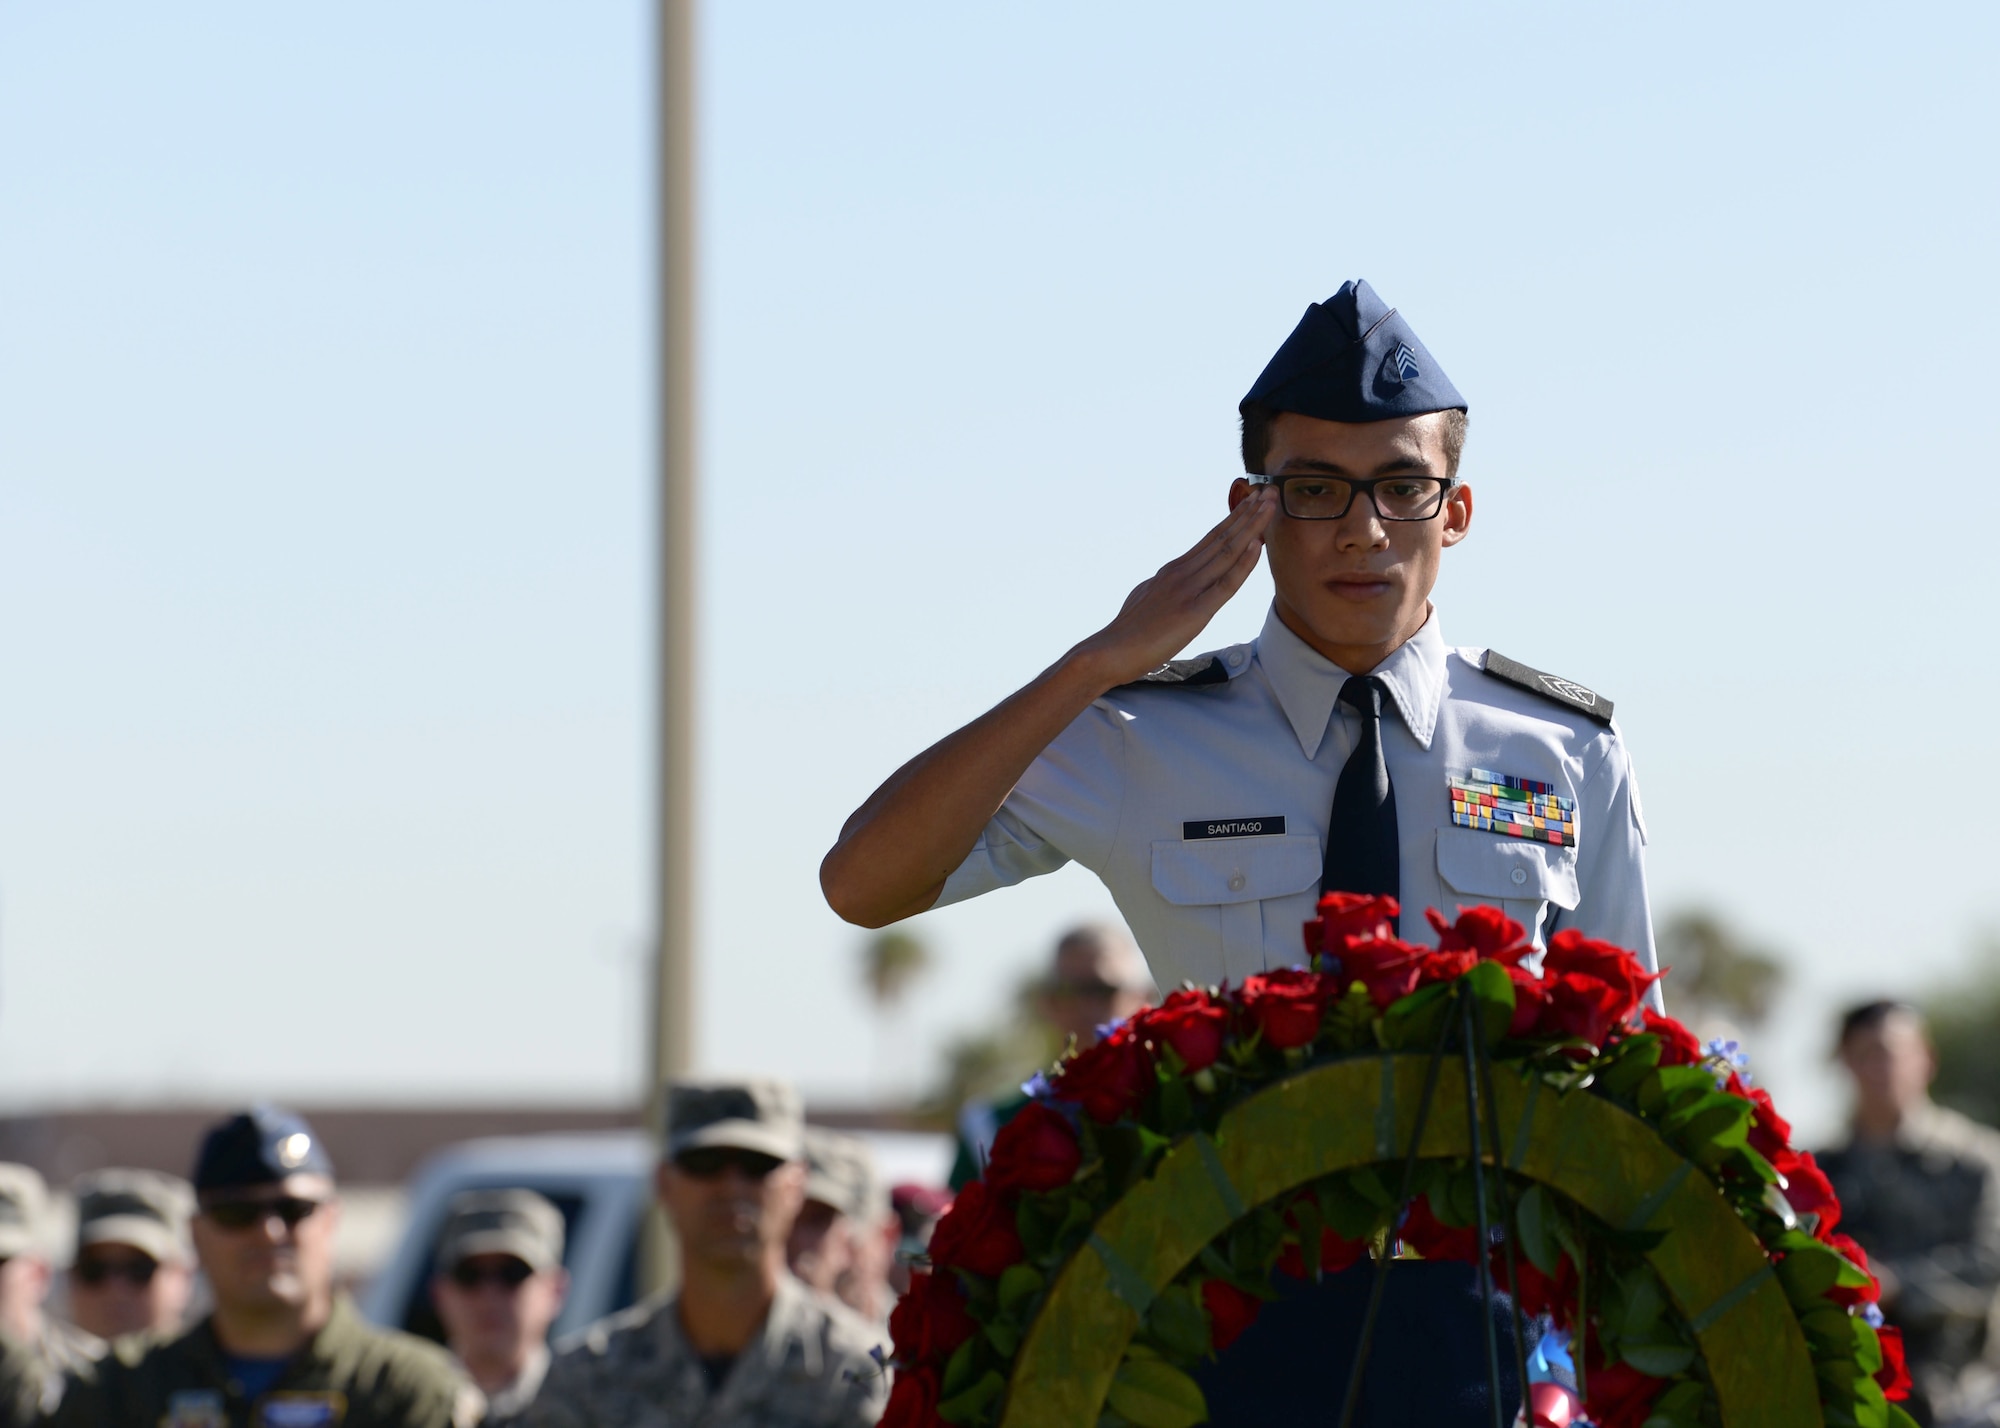 A Reserved Officers’ Training Corps student from Rancho High School salutes the wreath of flowers honoring service members at Freedom Park on Nellis Air Force Base, Nev., Sept. 21, 2018. The Prisoners of War/Missing in Action flag were manufactured for distribution in 1972 after Mrs. Michael Hoff contacted Norman Rivkees from Annin and Company to produce a flag to represent service members that were missing. (U.S. Air Force photo by Airman 1st Class Bryan T. Guthrie)